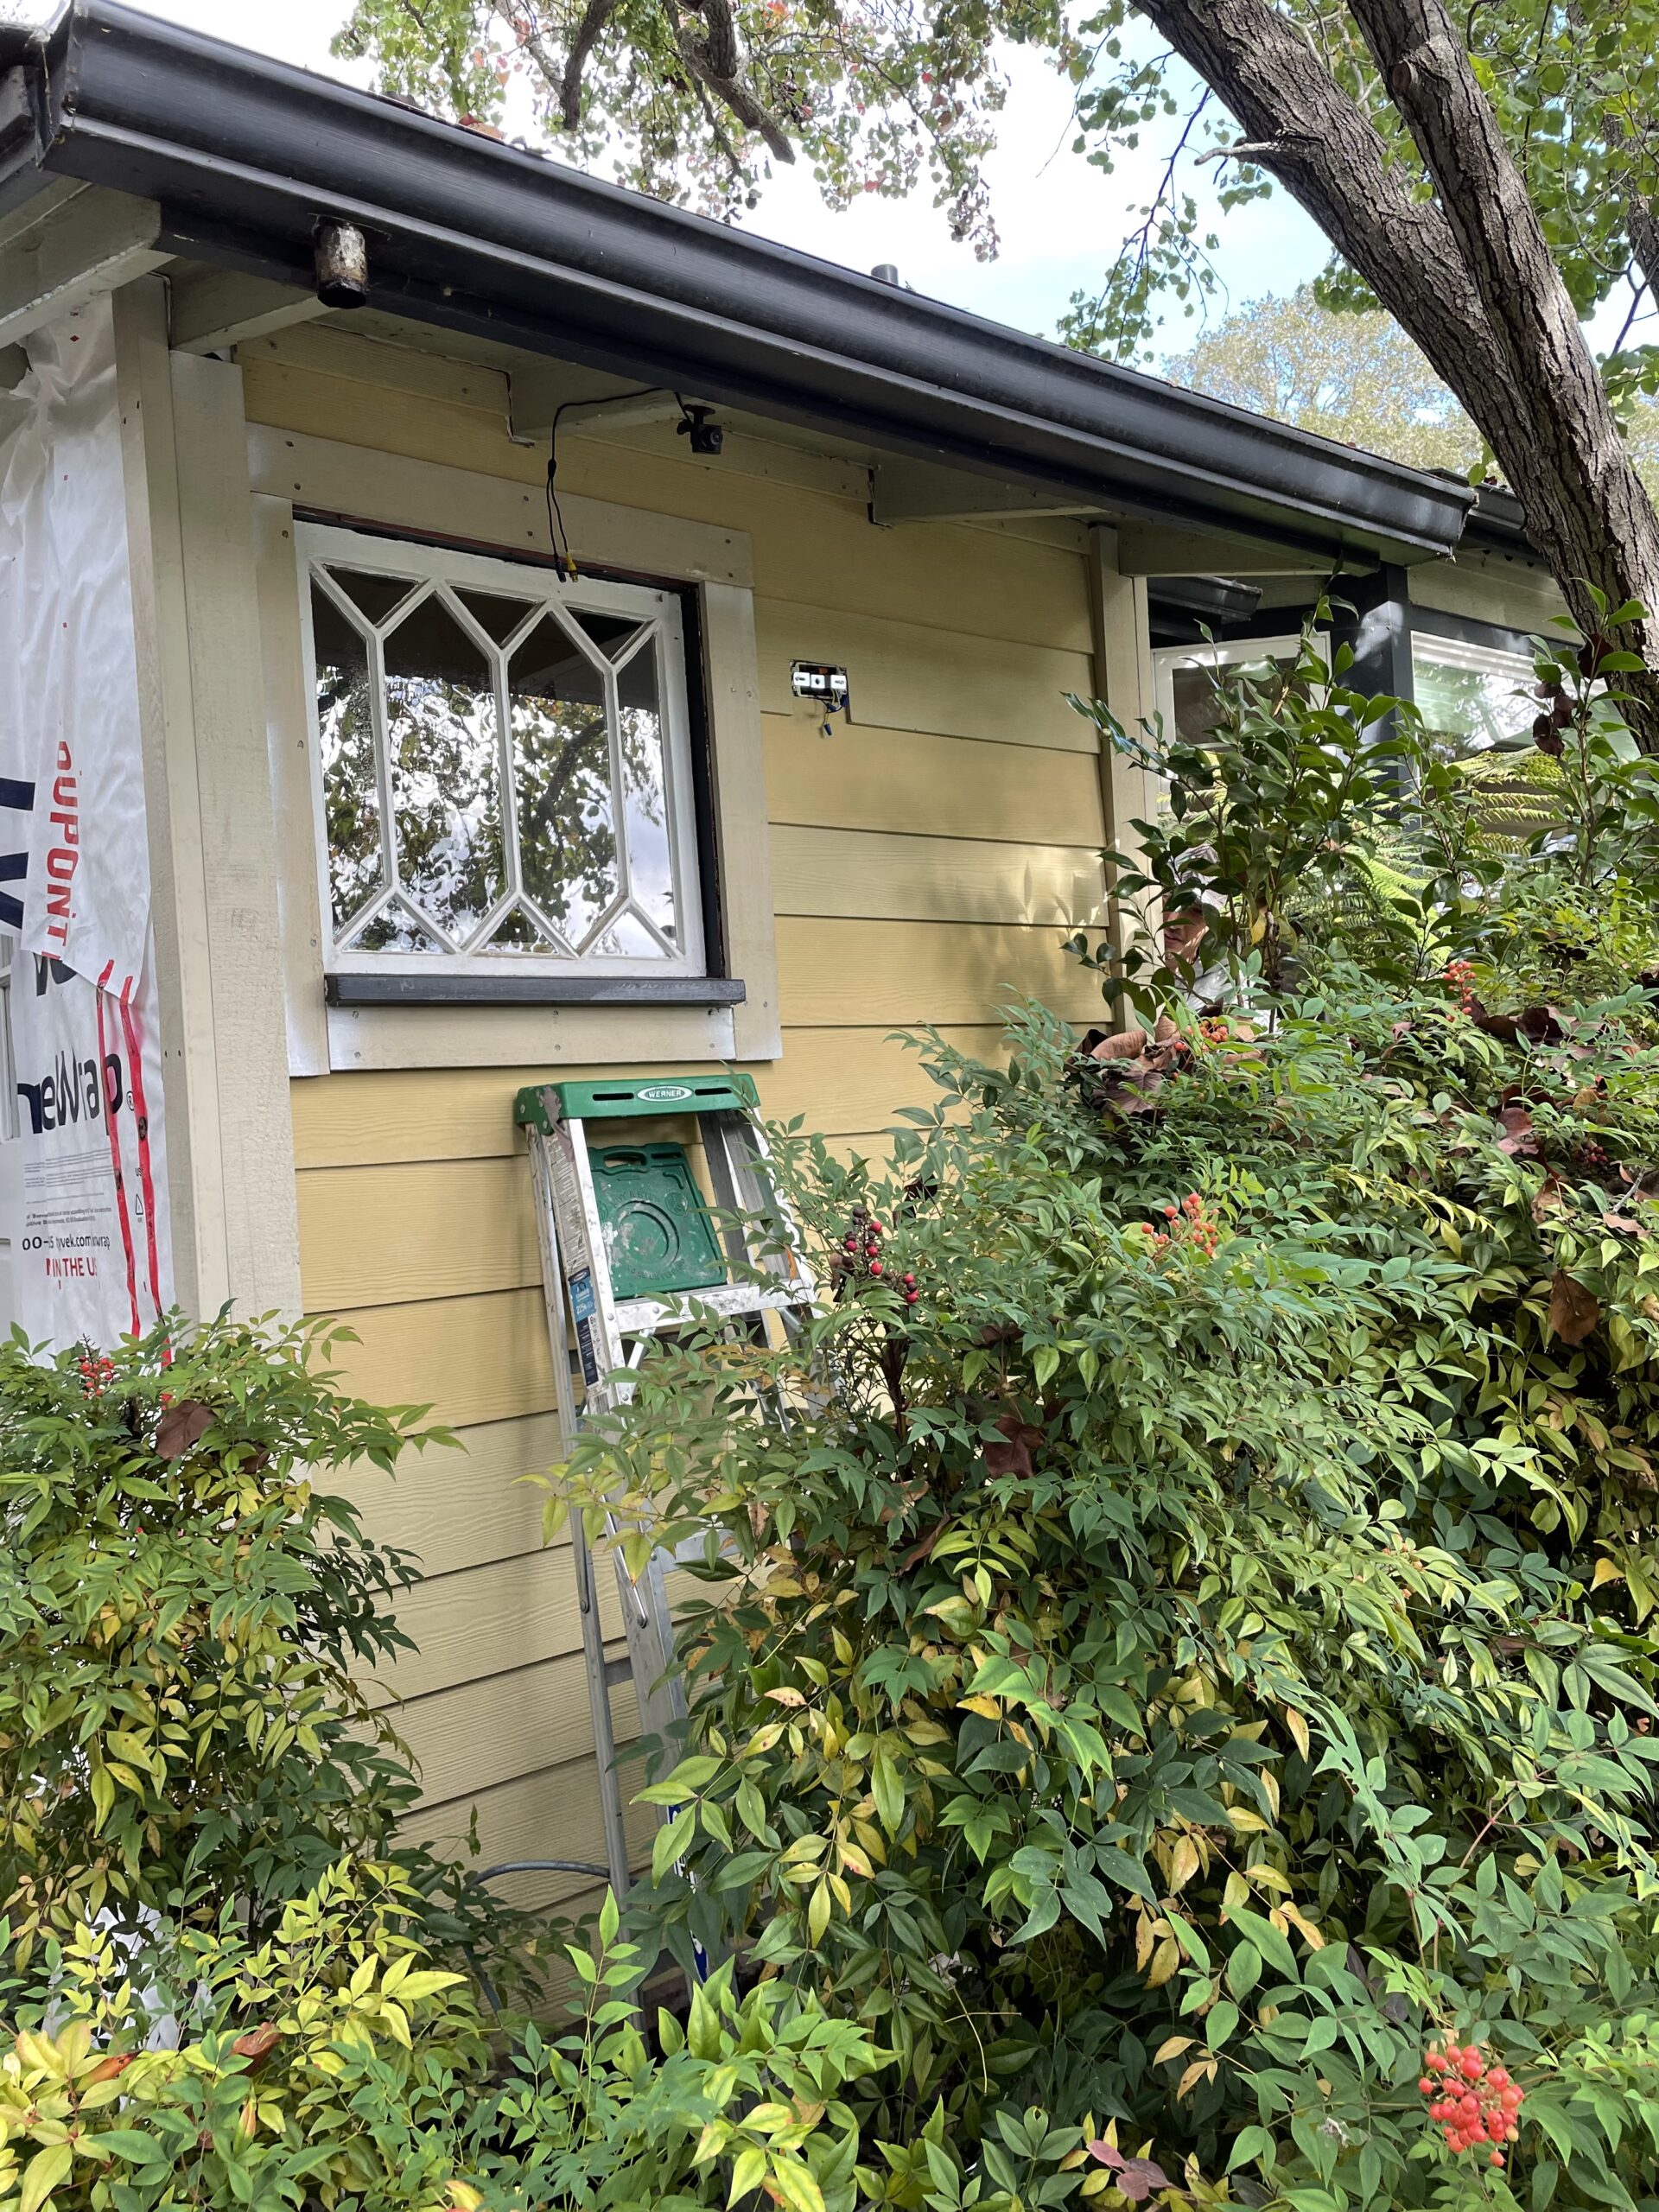 New siding and dry rot repairs